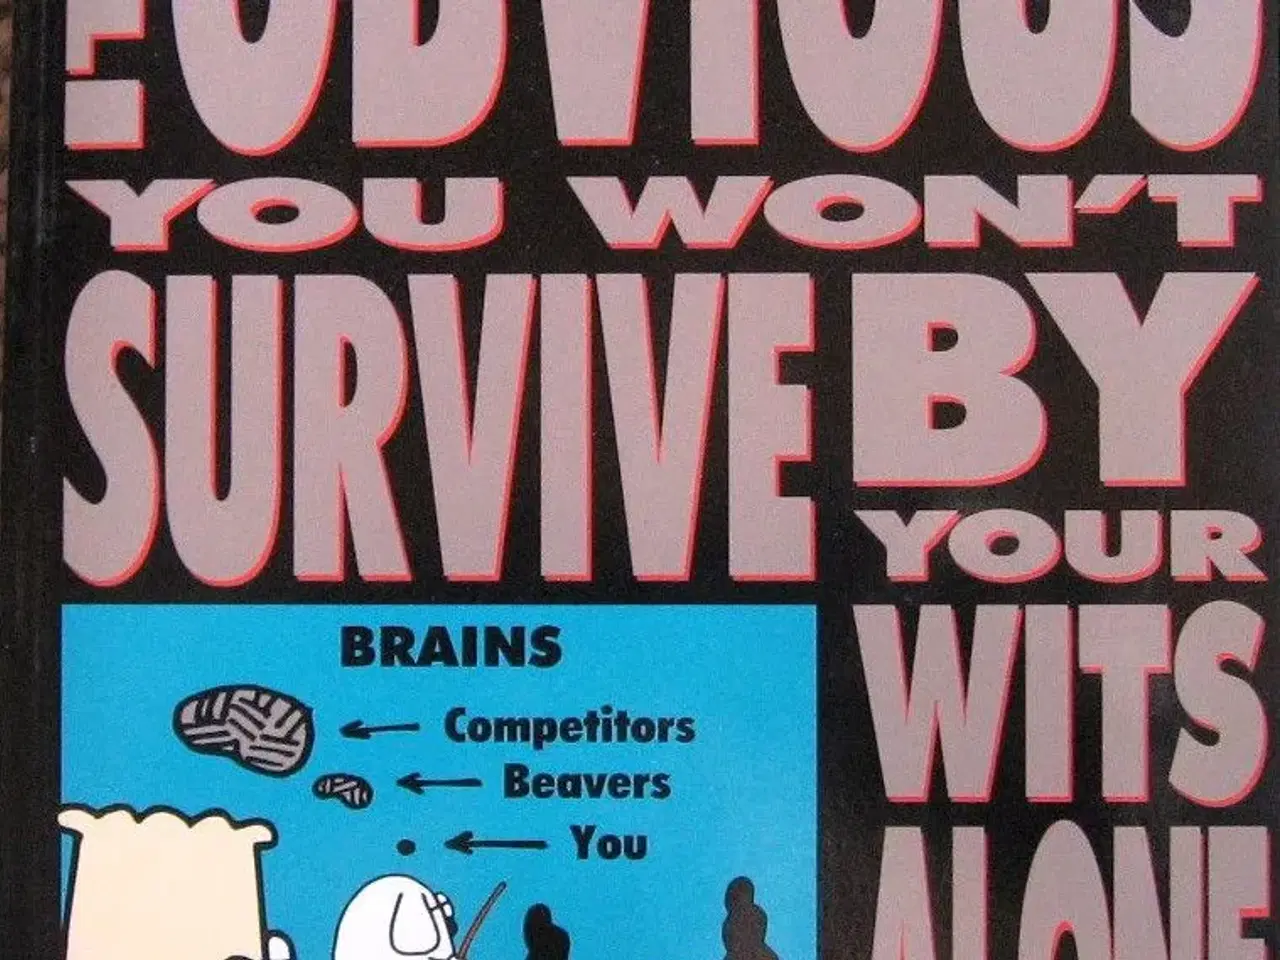 Billede 1 - Dilbert book - its obvious you wont survive by you